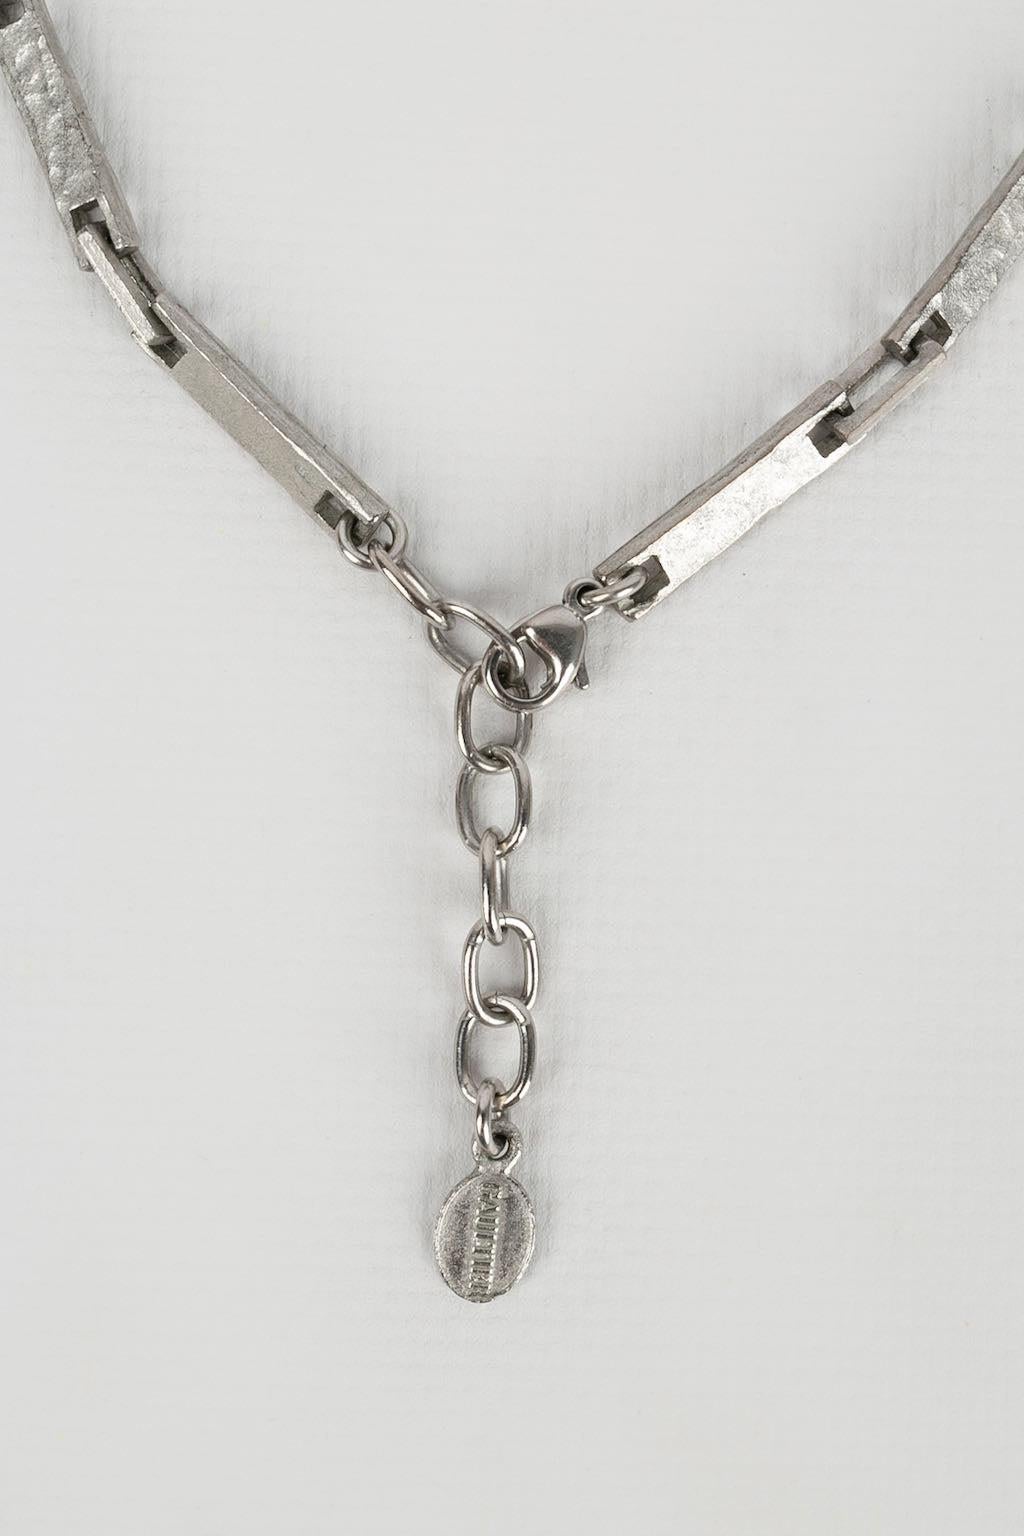 Jean Paul Gaultier Silver Metal Necklace with Multicolored Stones For Sale 2